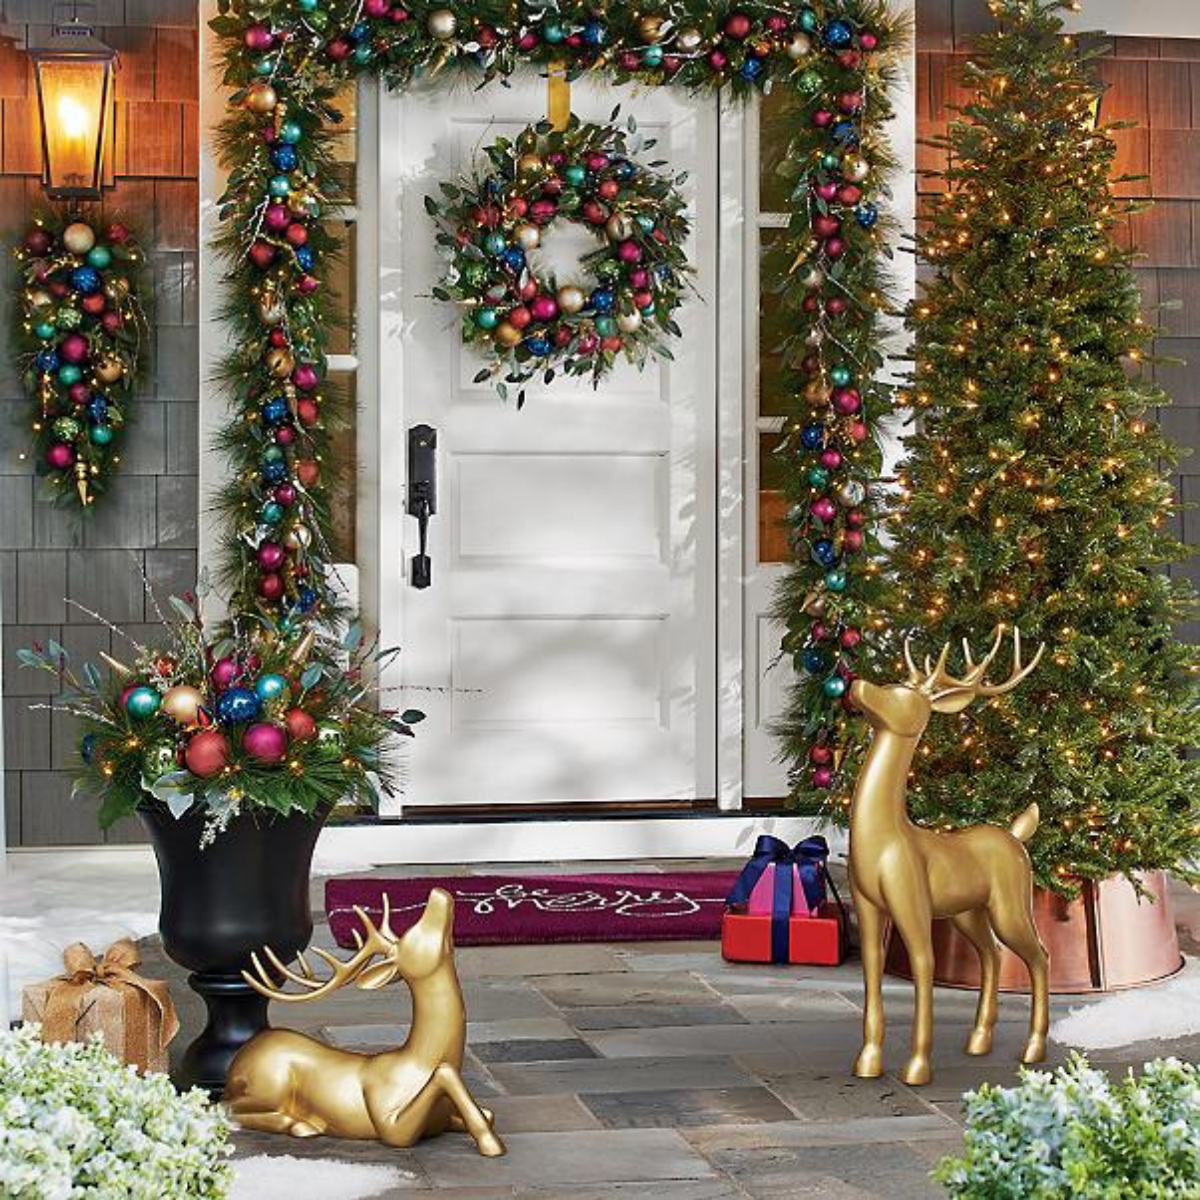 Outdoor Christmas Decorations. Top 70+ Christmas Decoration Ideas - 17